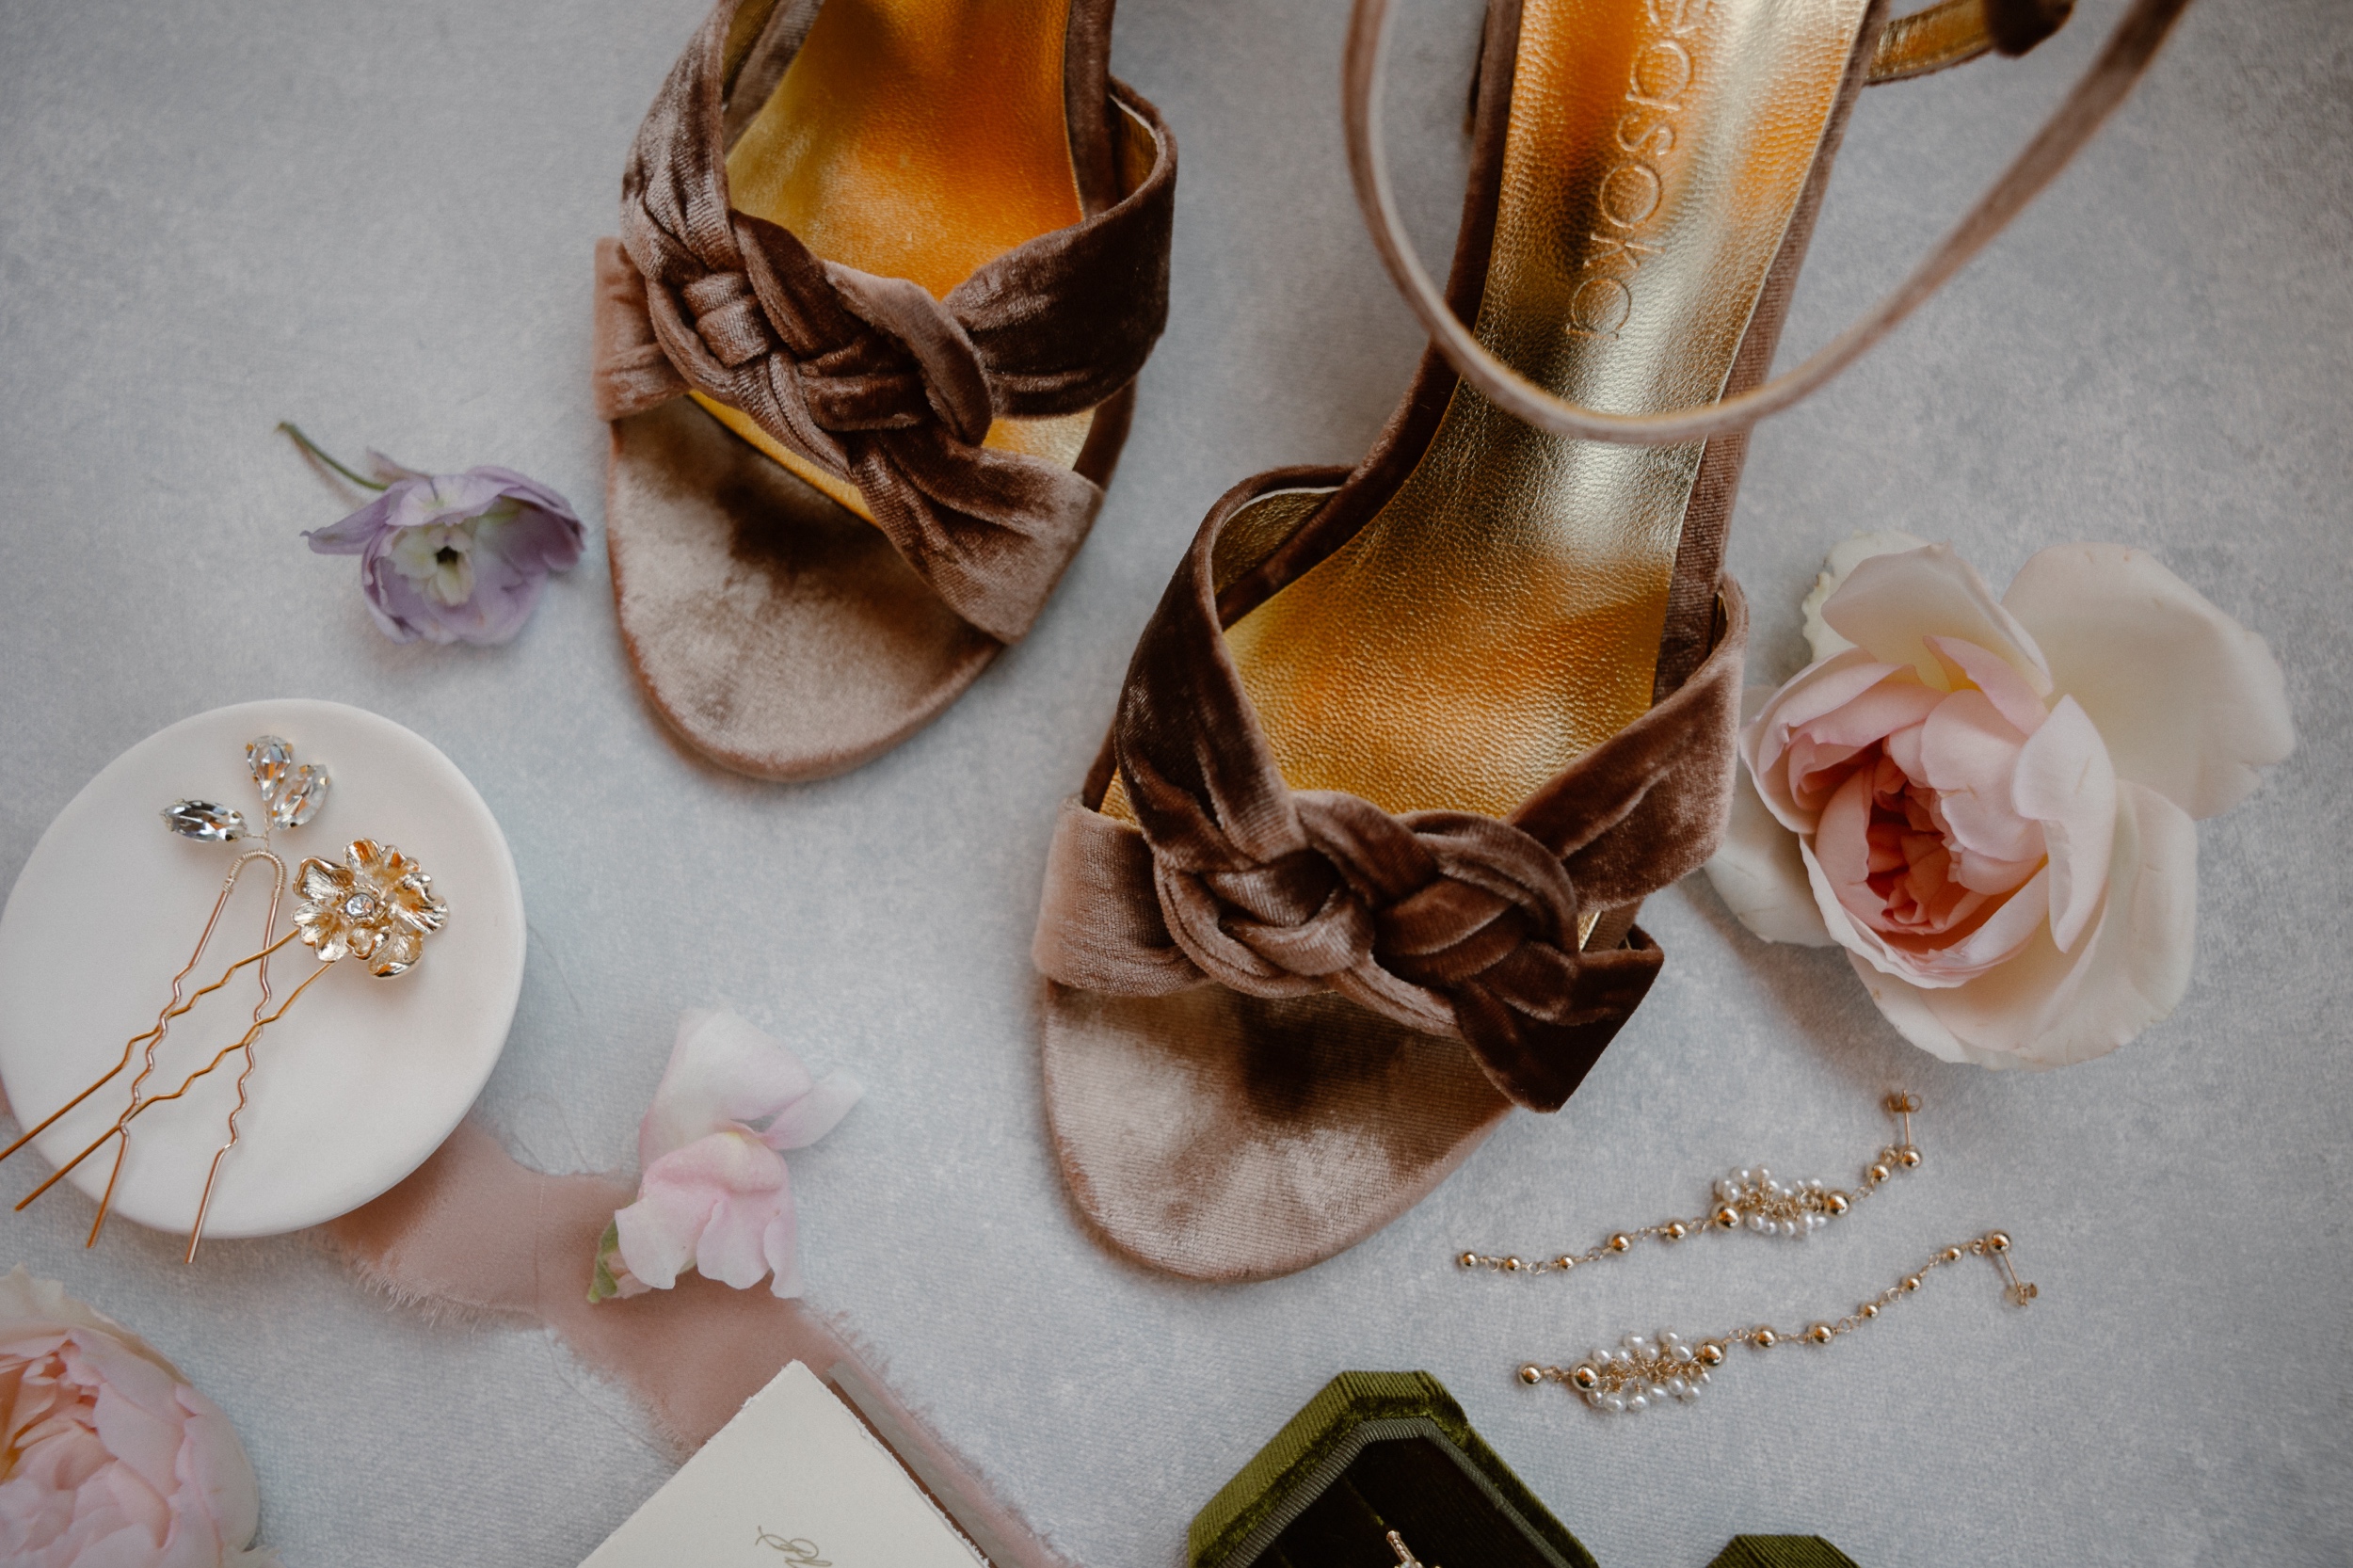 A color photo of a bride's wedding details, including her wedding shoes, hair pins, jewelry, and flowers. Photo by Ashley Joyce.